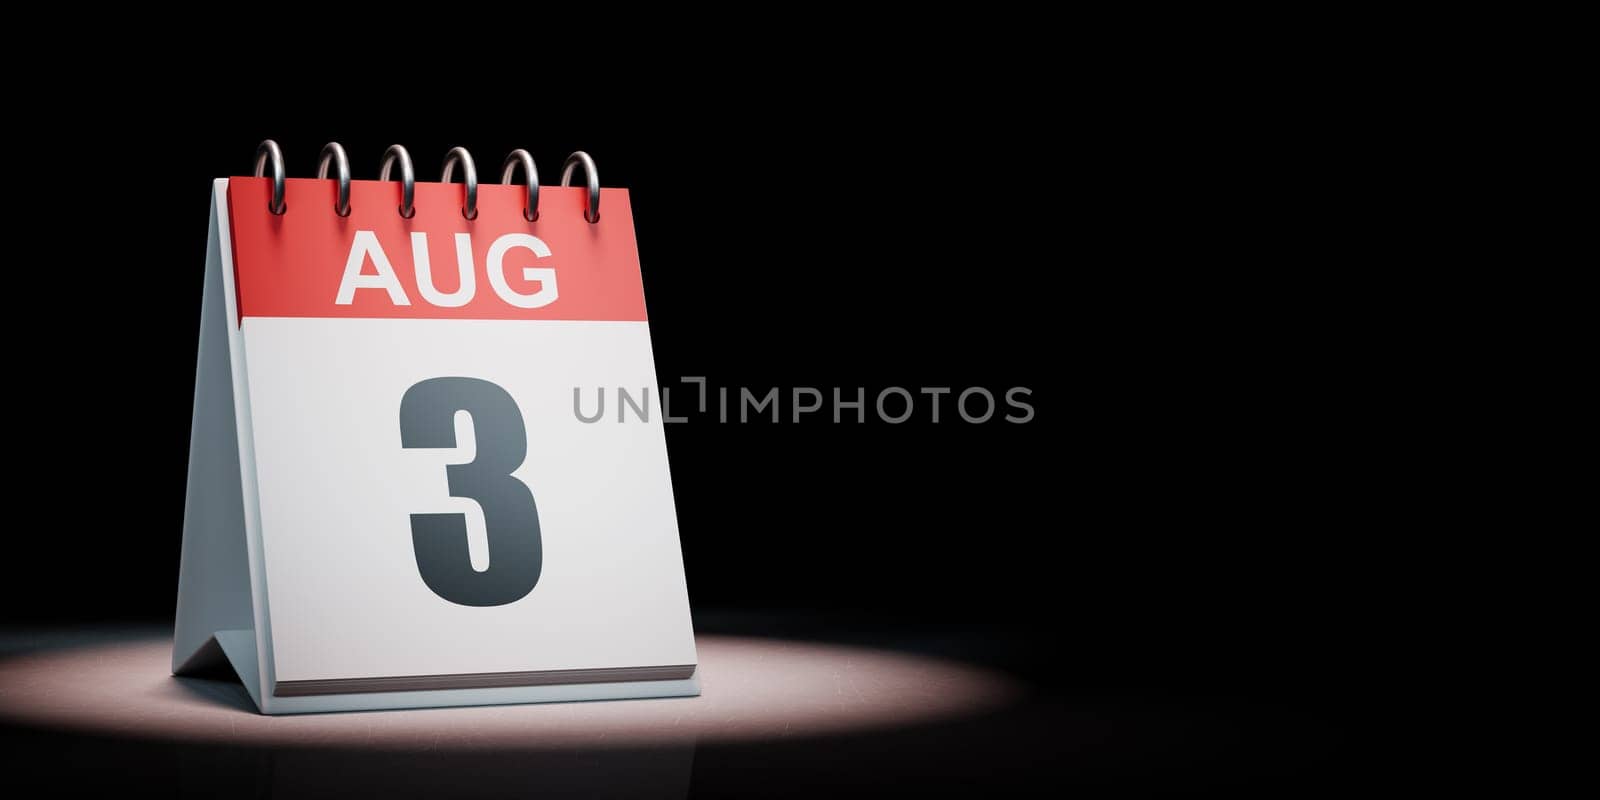 Red and White August 3 Desk Calendar Spotlighted on Black Background with Copy Space 3D Illustration